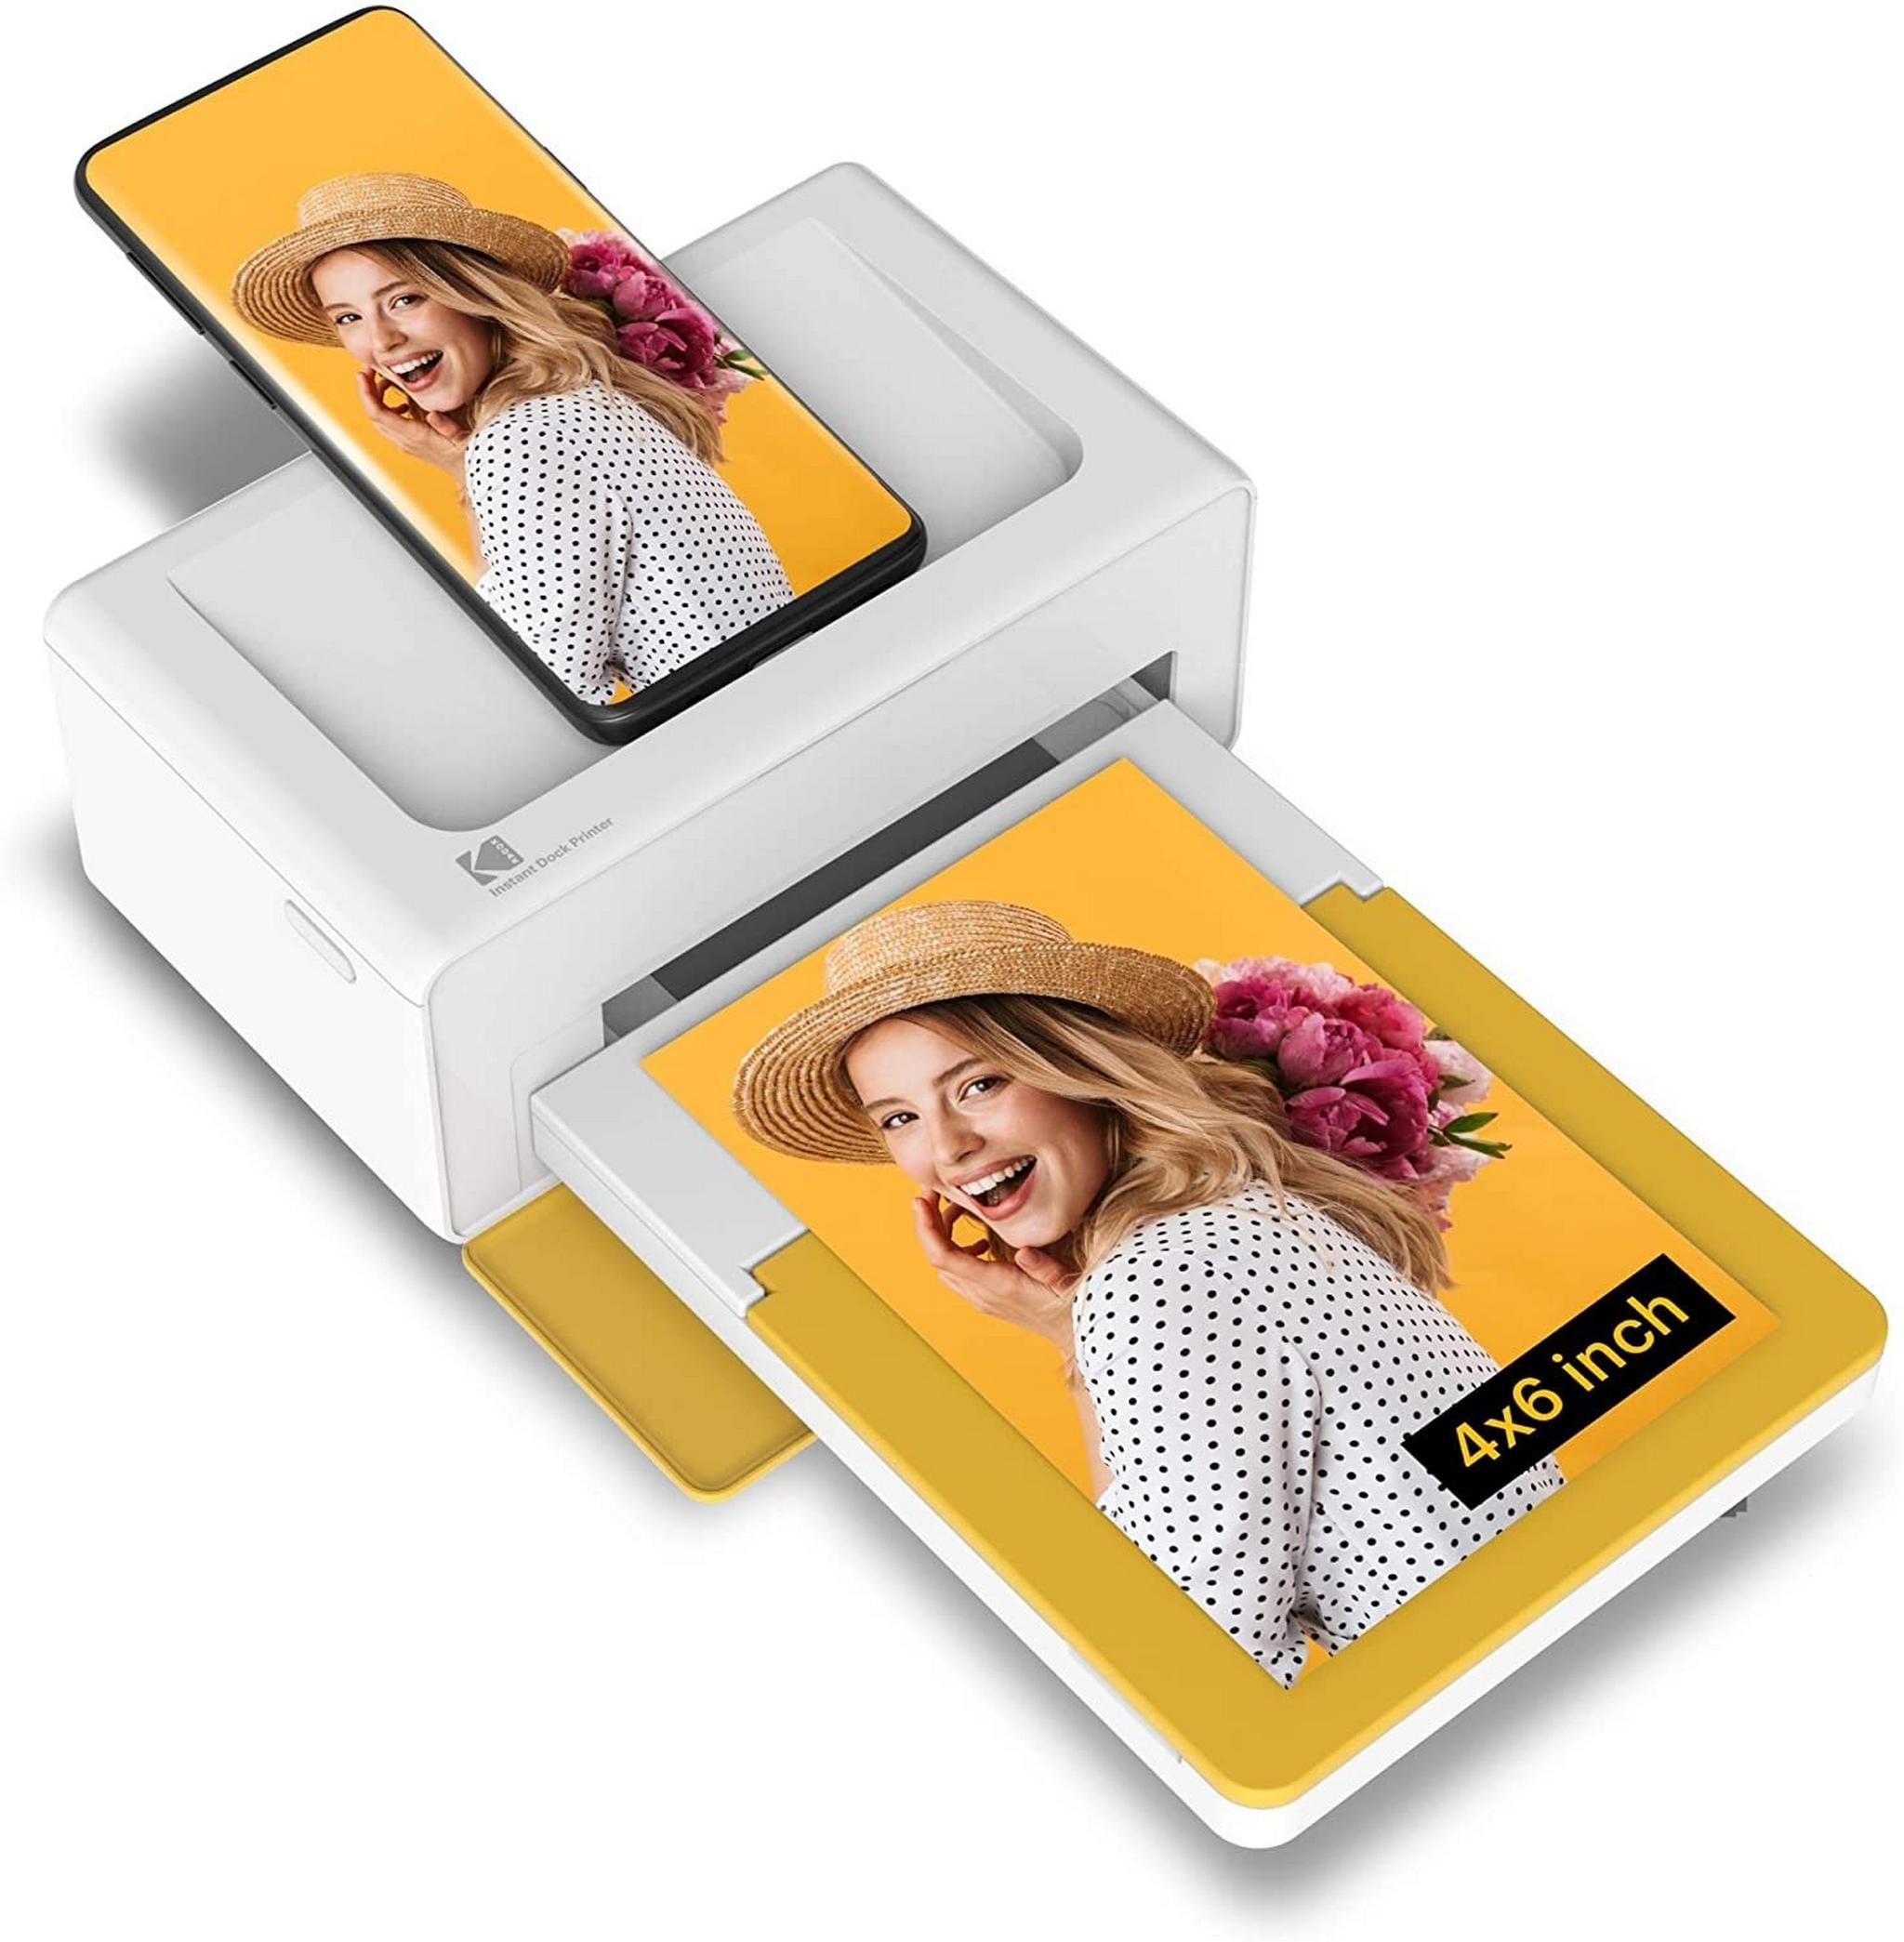 KODAK Photo Printer Dock PD-460 with Type-C dock, Android & iPhone connector